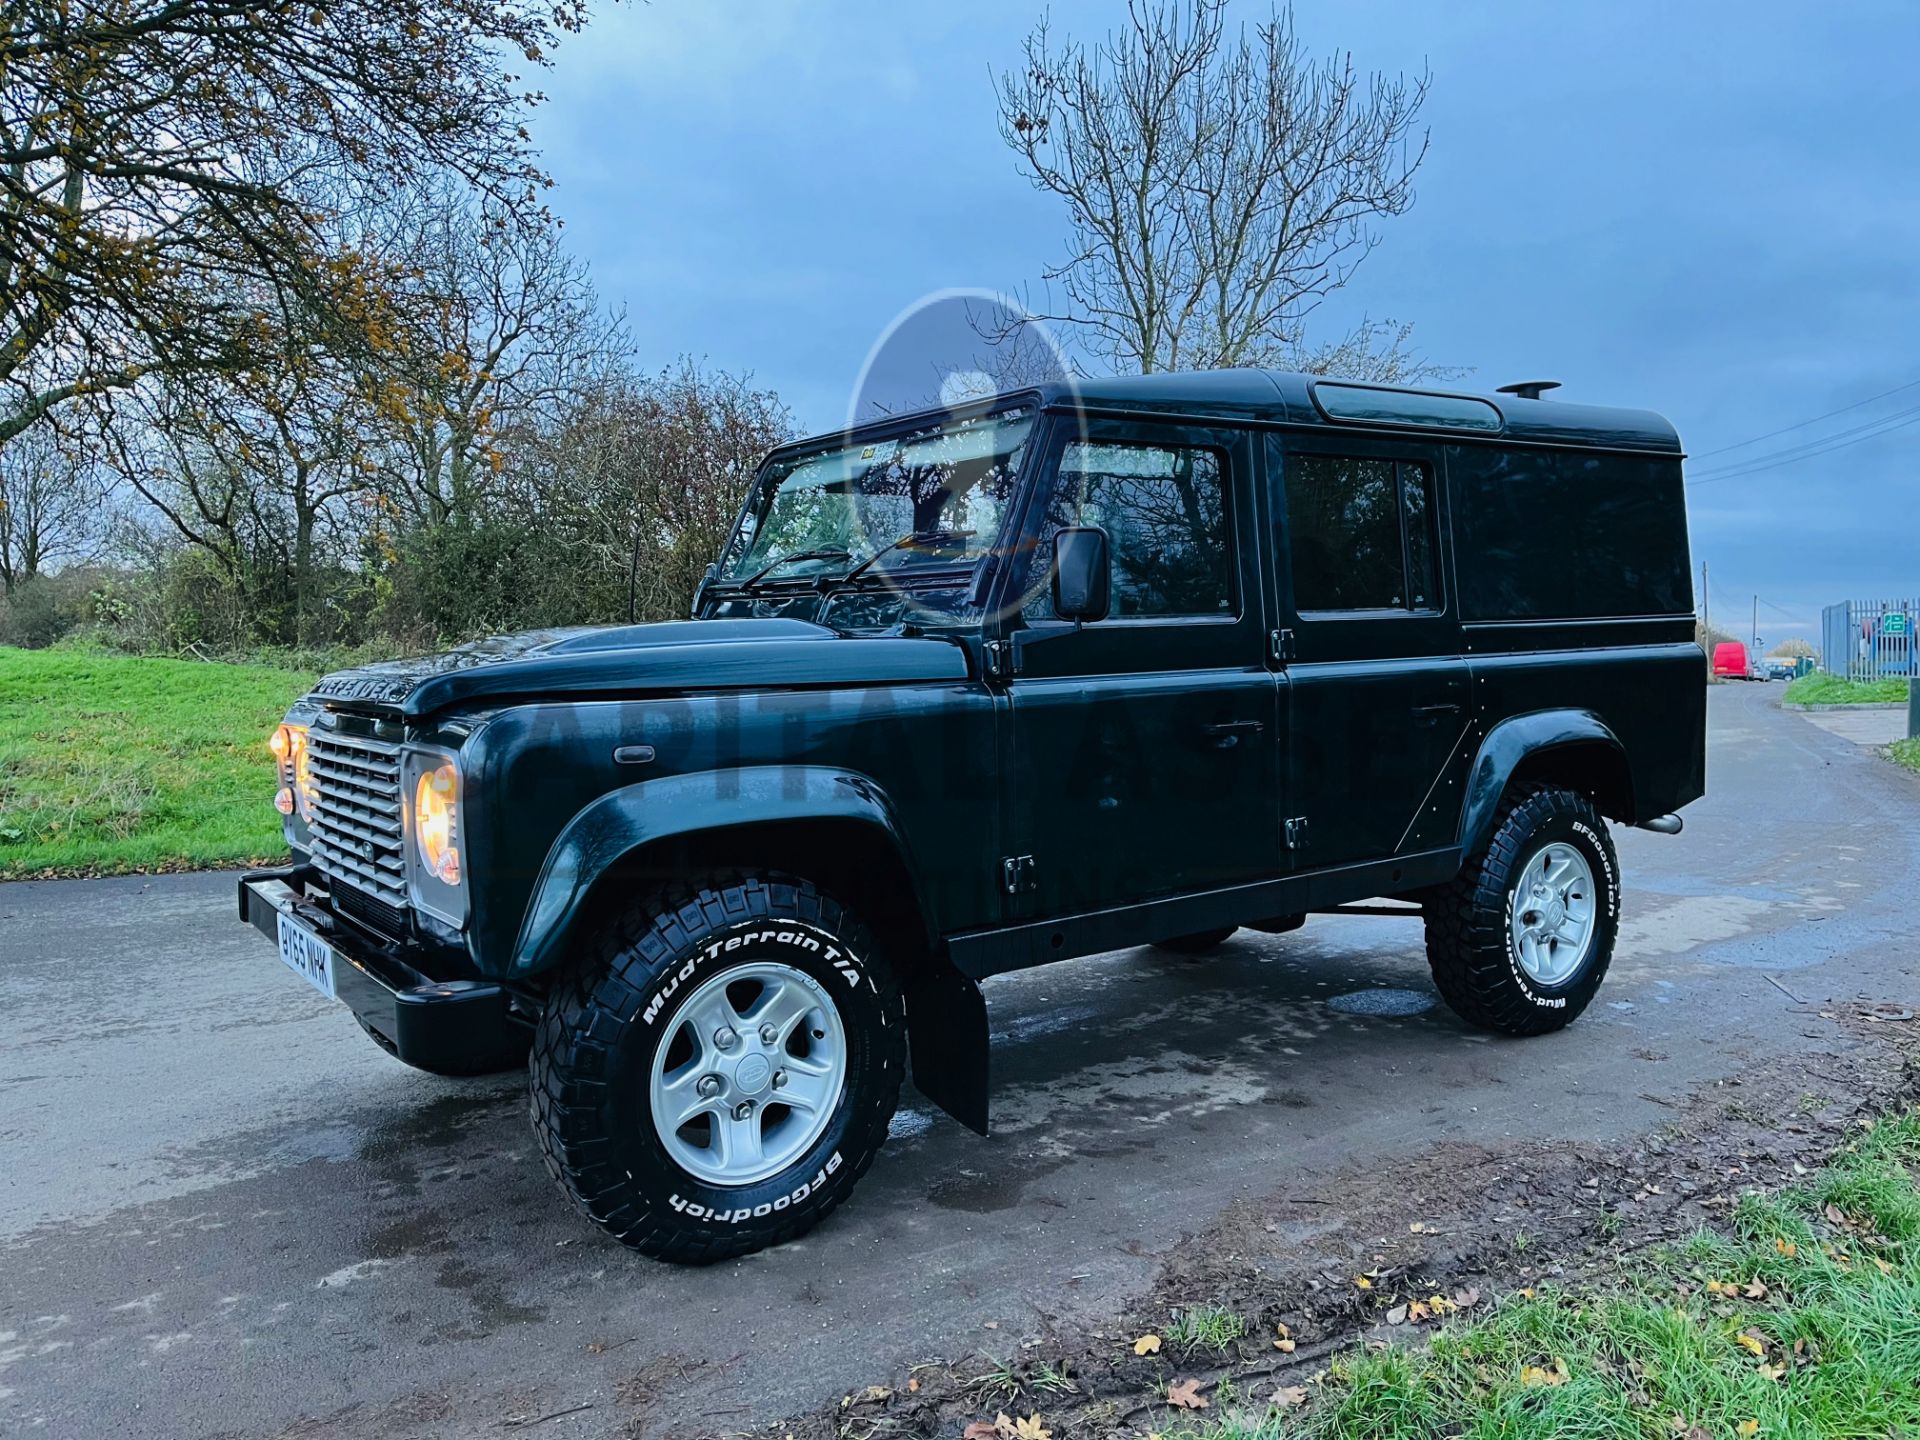 (ON SALE) LAND ROVER DEFENDER 110 *COUNTY-UTILITY WAGON* 2.2 TDCI (2016 MODEL) ONLY 37K MILES!! - Image 6 of 24